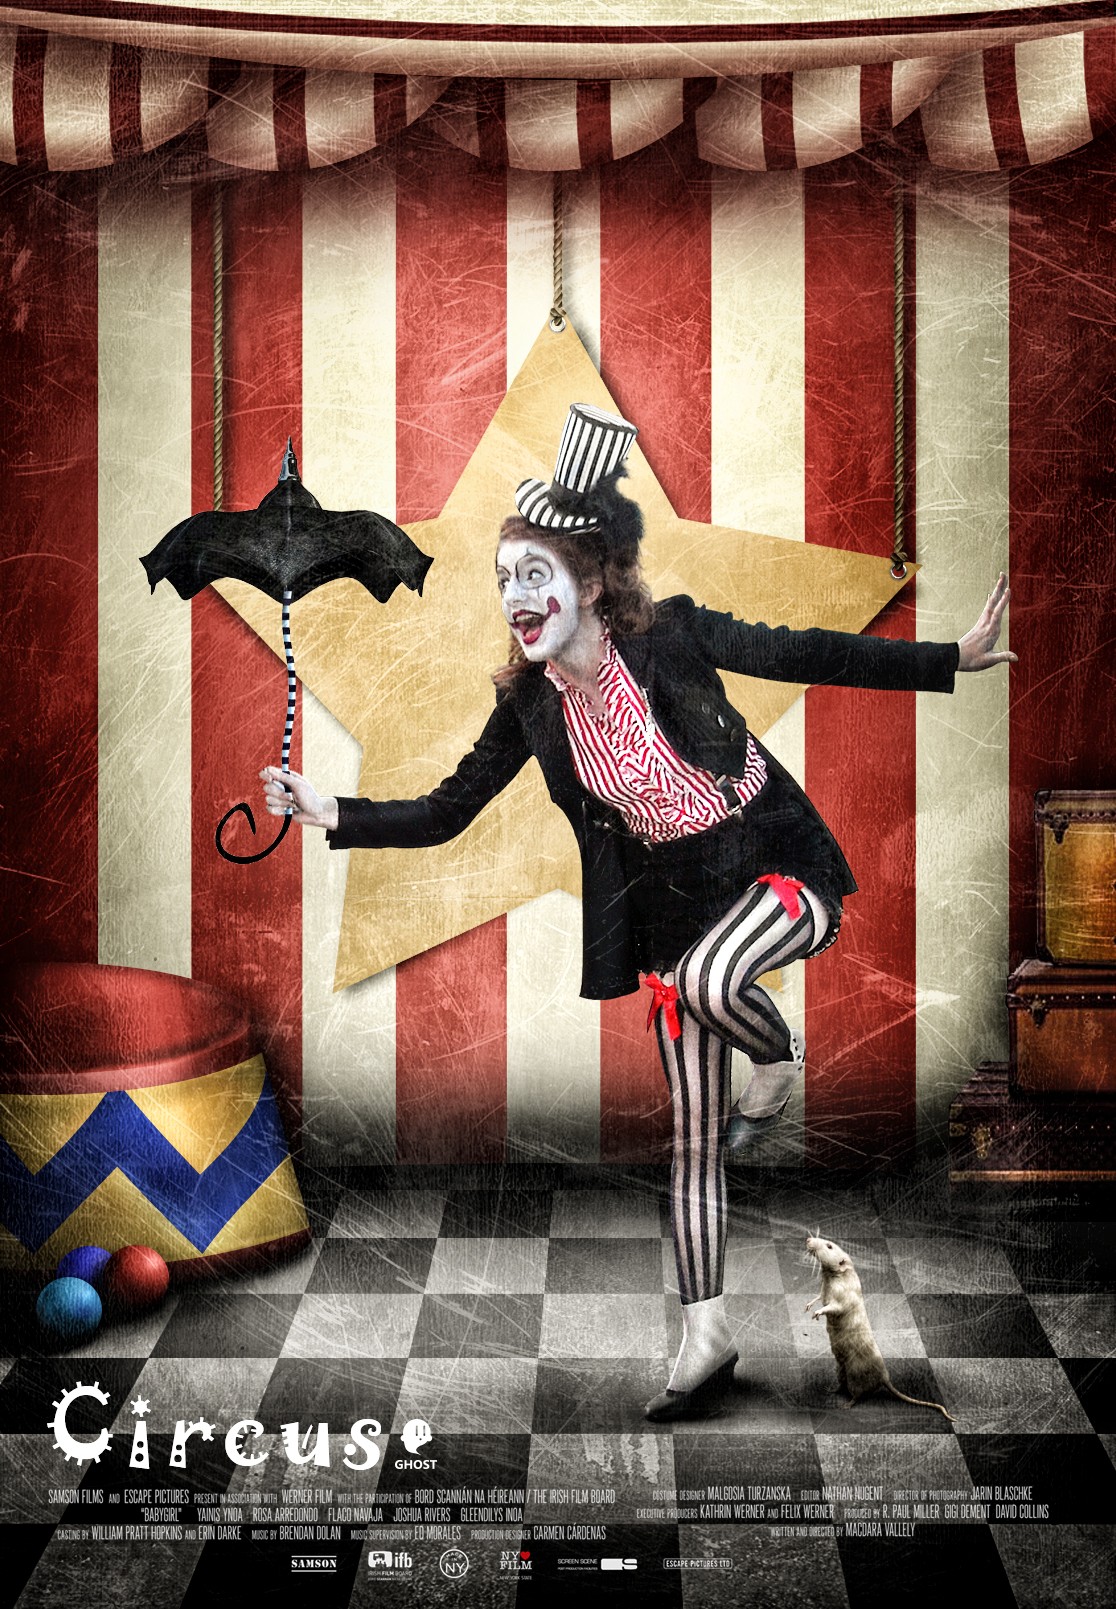 People 1116x1609 circus women clown umbrella rats funny hats hat women with hats stockings striped stockings face paint model open mouth happy